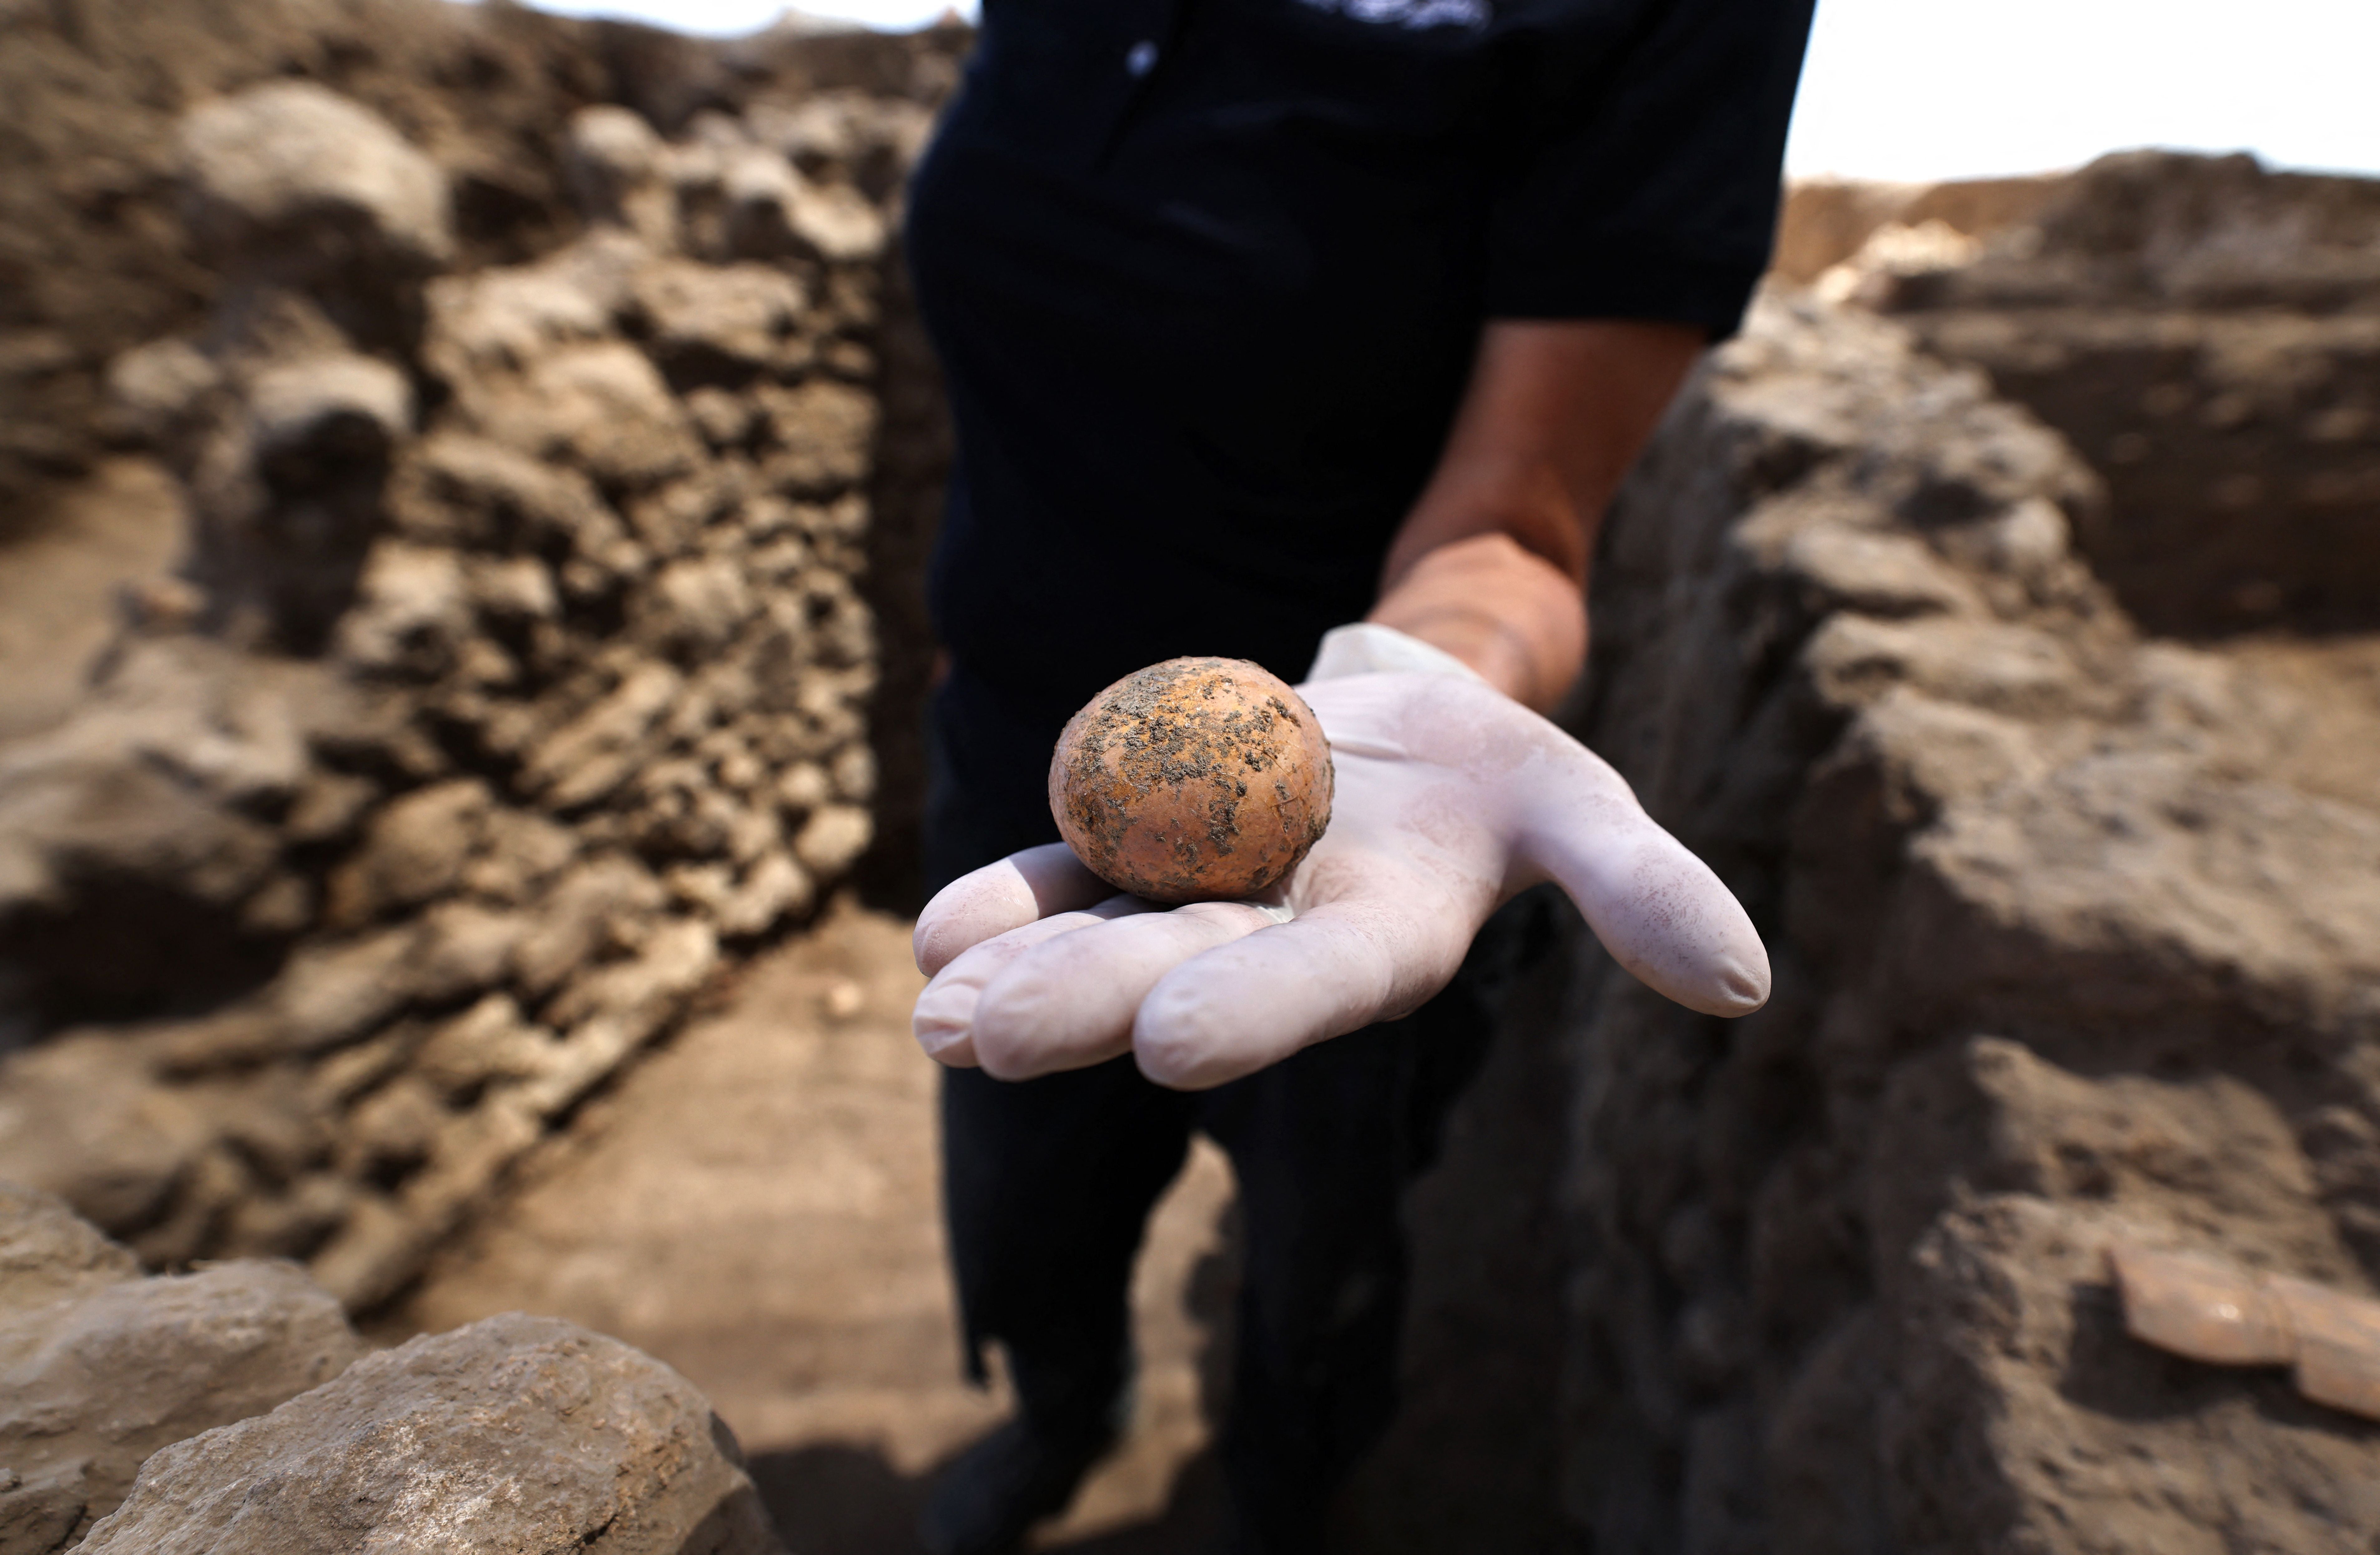 A 1,000-year-old chicken egg found in Israel. (Photo: EMMANUEL DUNAND/AFP, Getty Images)